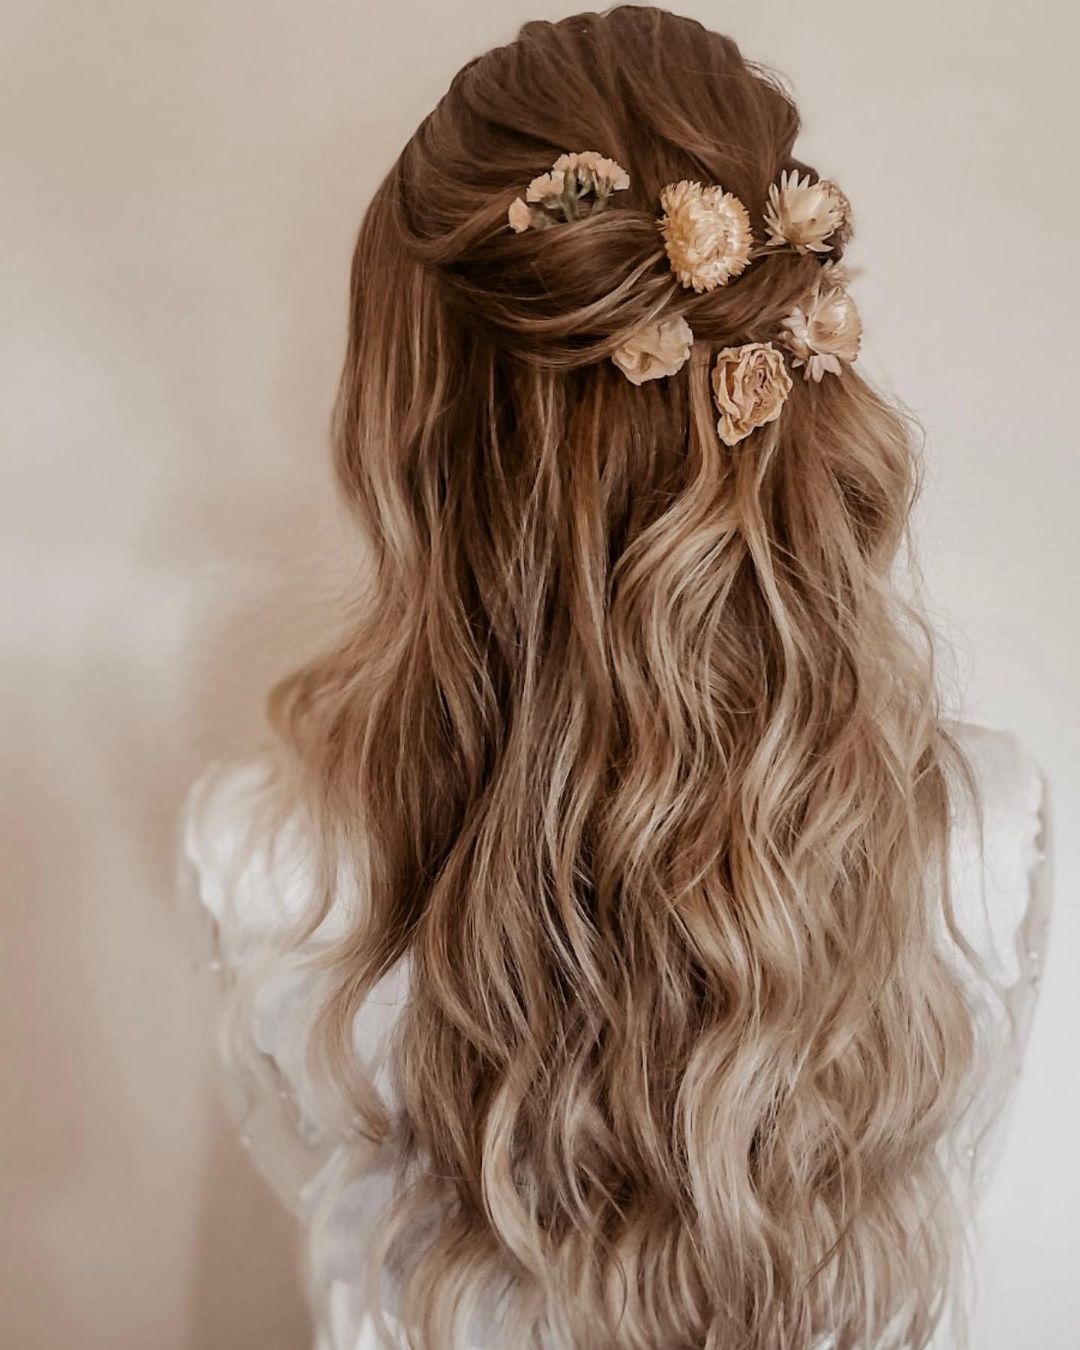 Half up half down homecoming hairstyle with flowers via bridalmuah